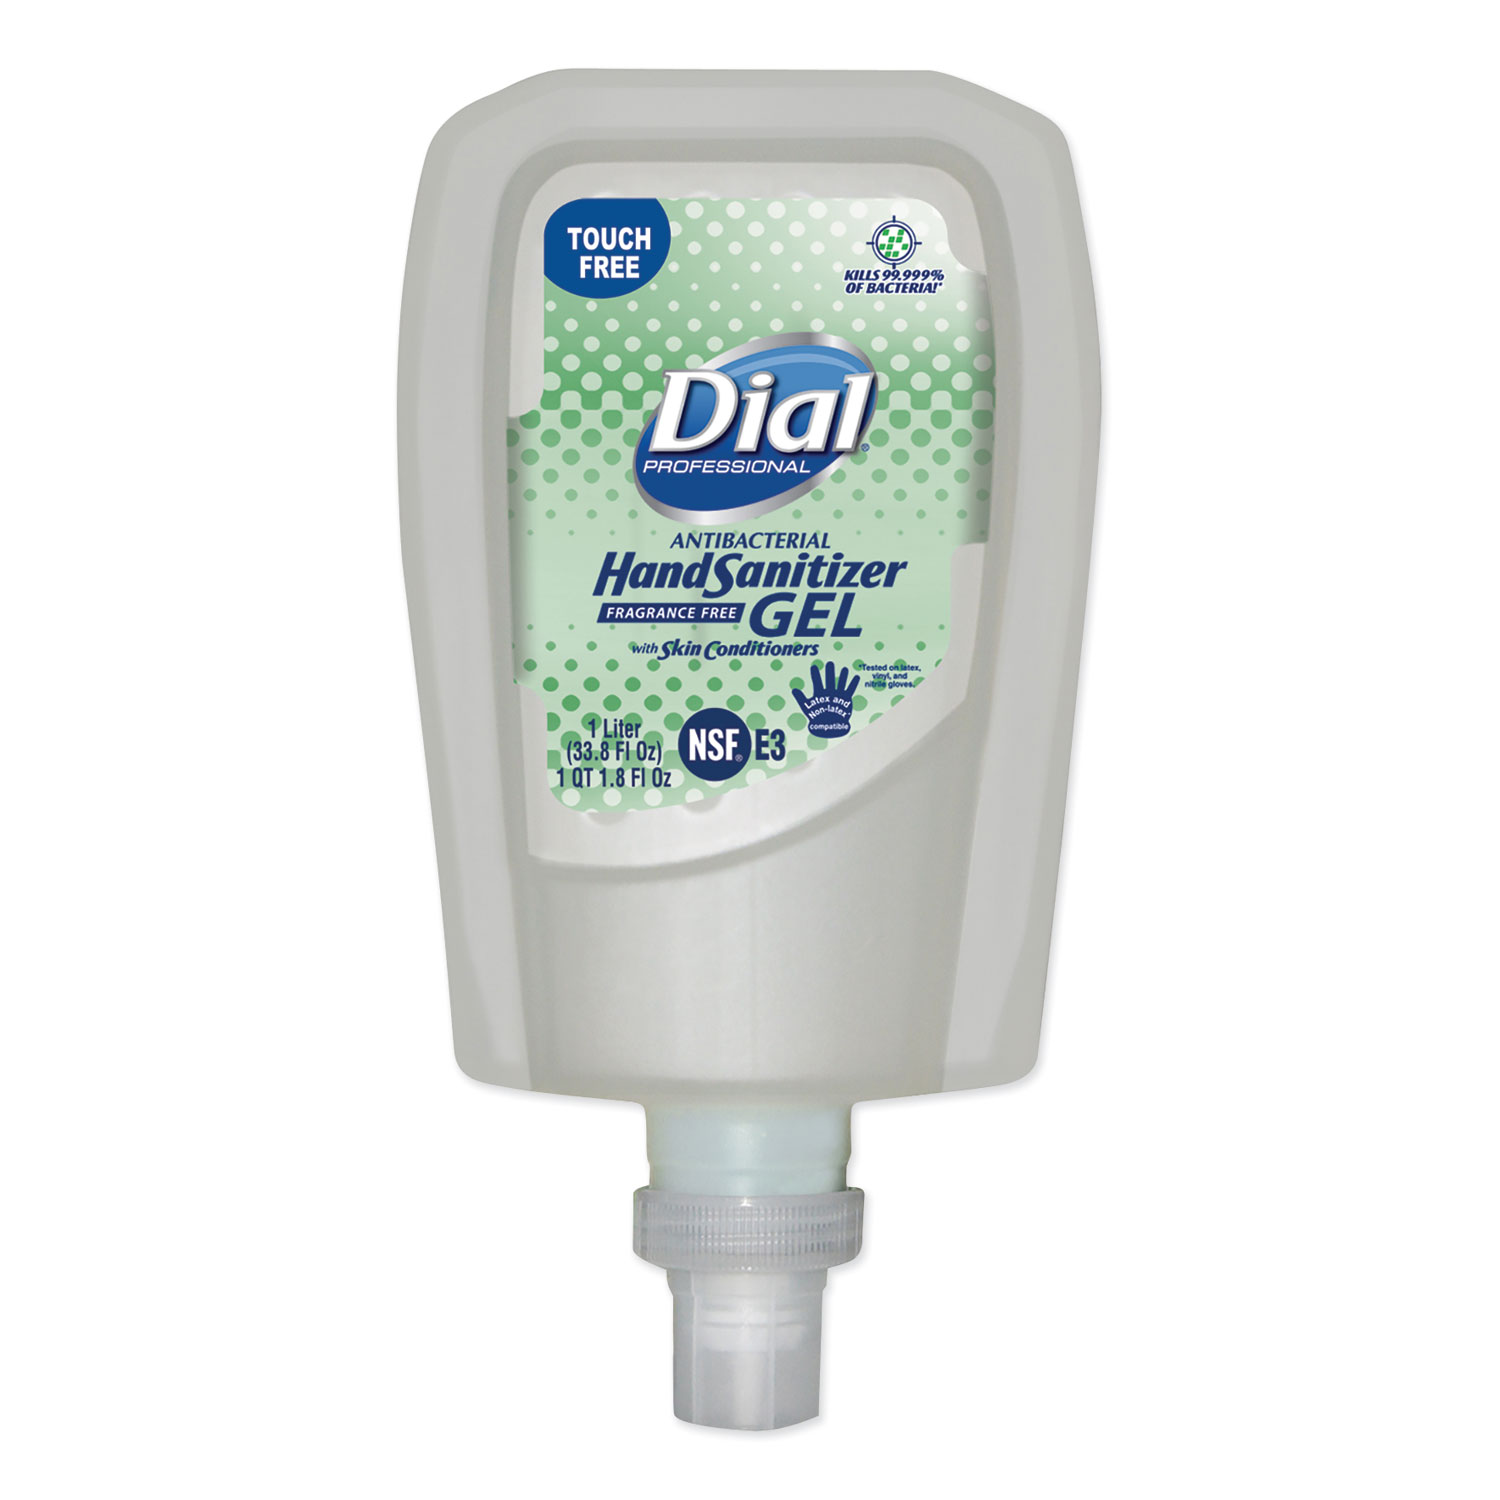  Dial Professional 19029EA FIT Fragrance-Free Antimicrobial Touch Free Dispenser Refill Gel Hand Sanitizer, 1000 mL (DIA19029EA) 